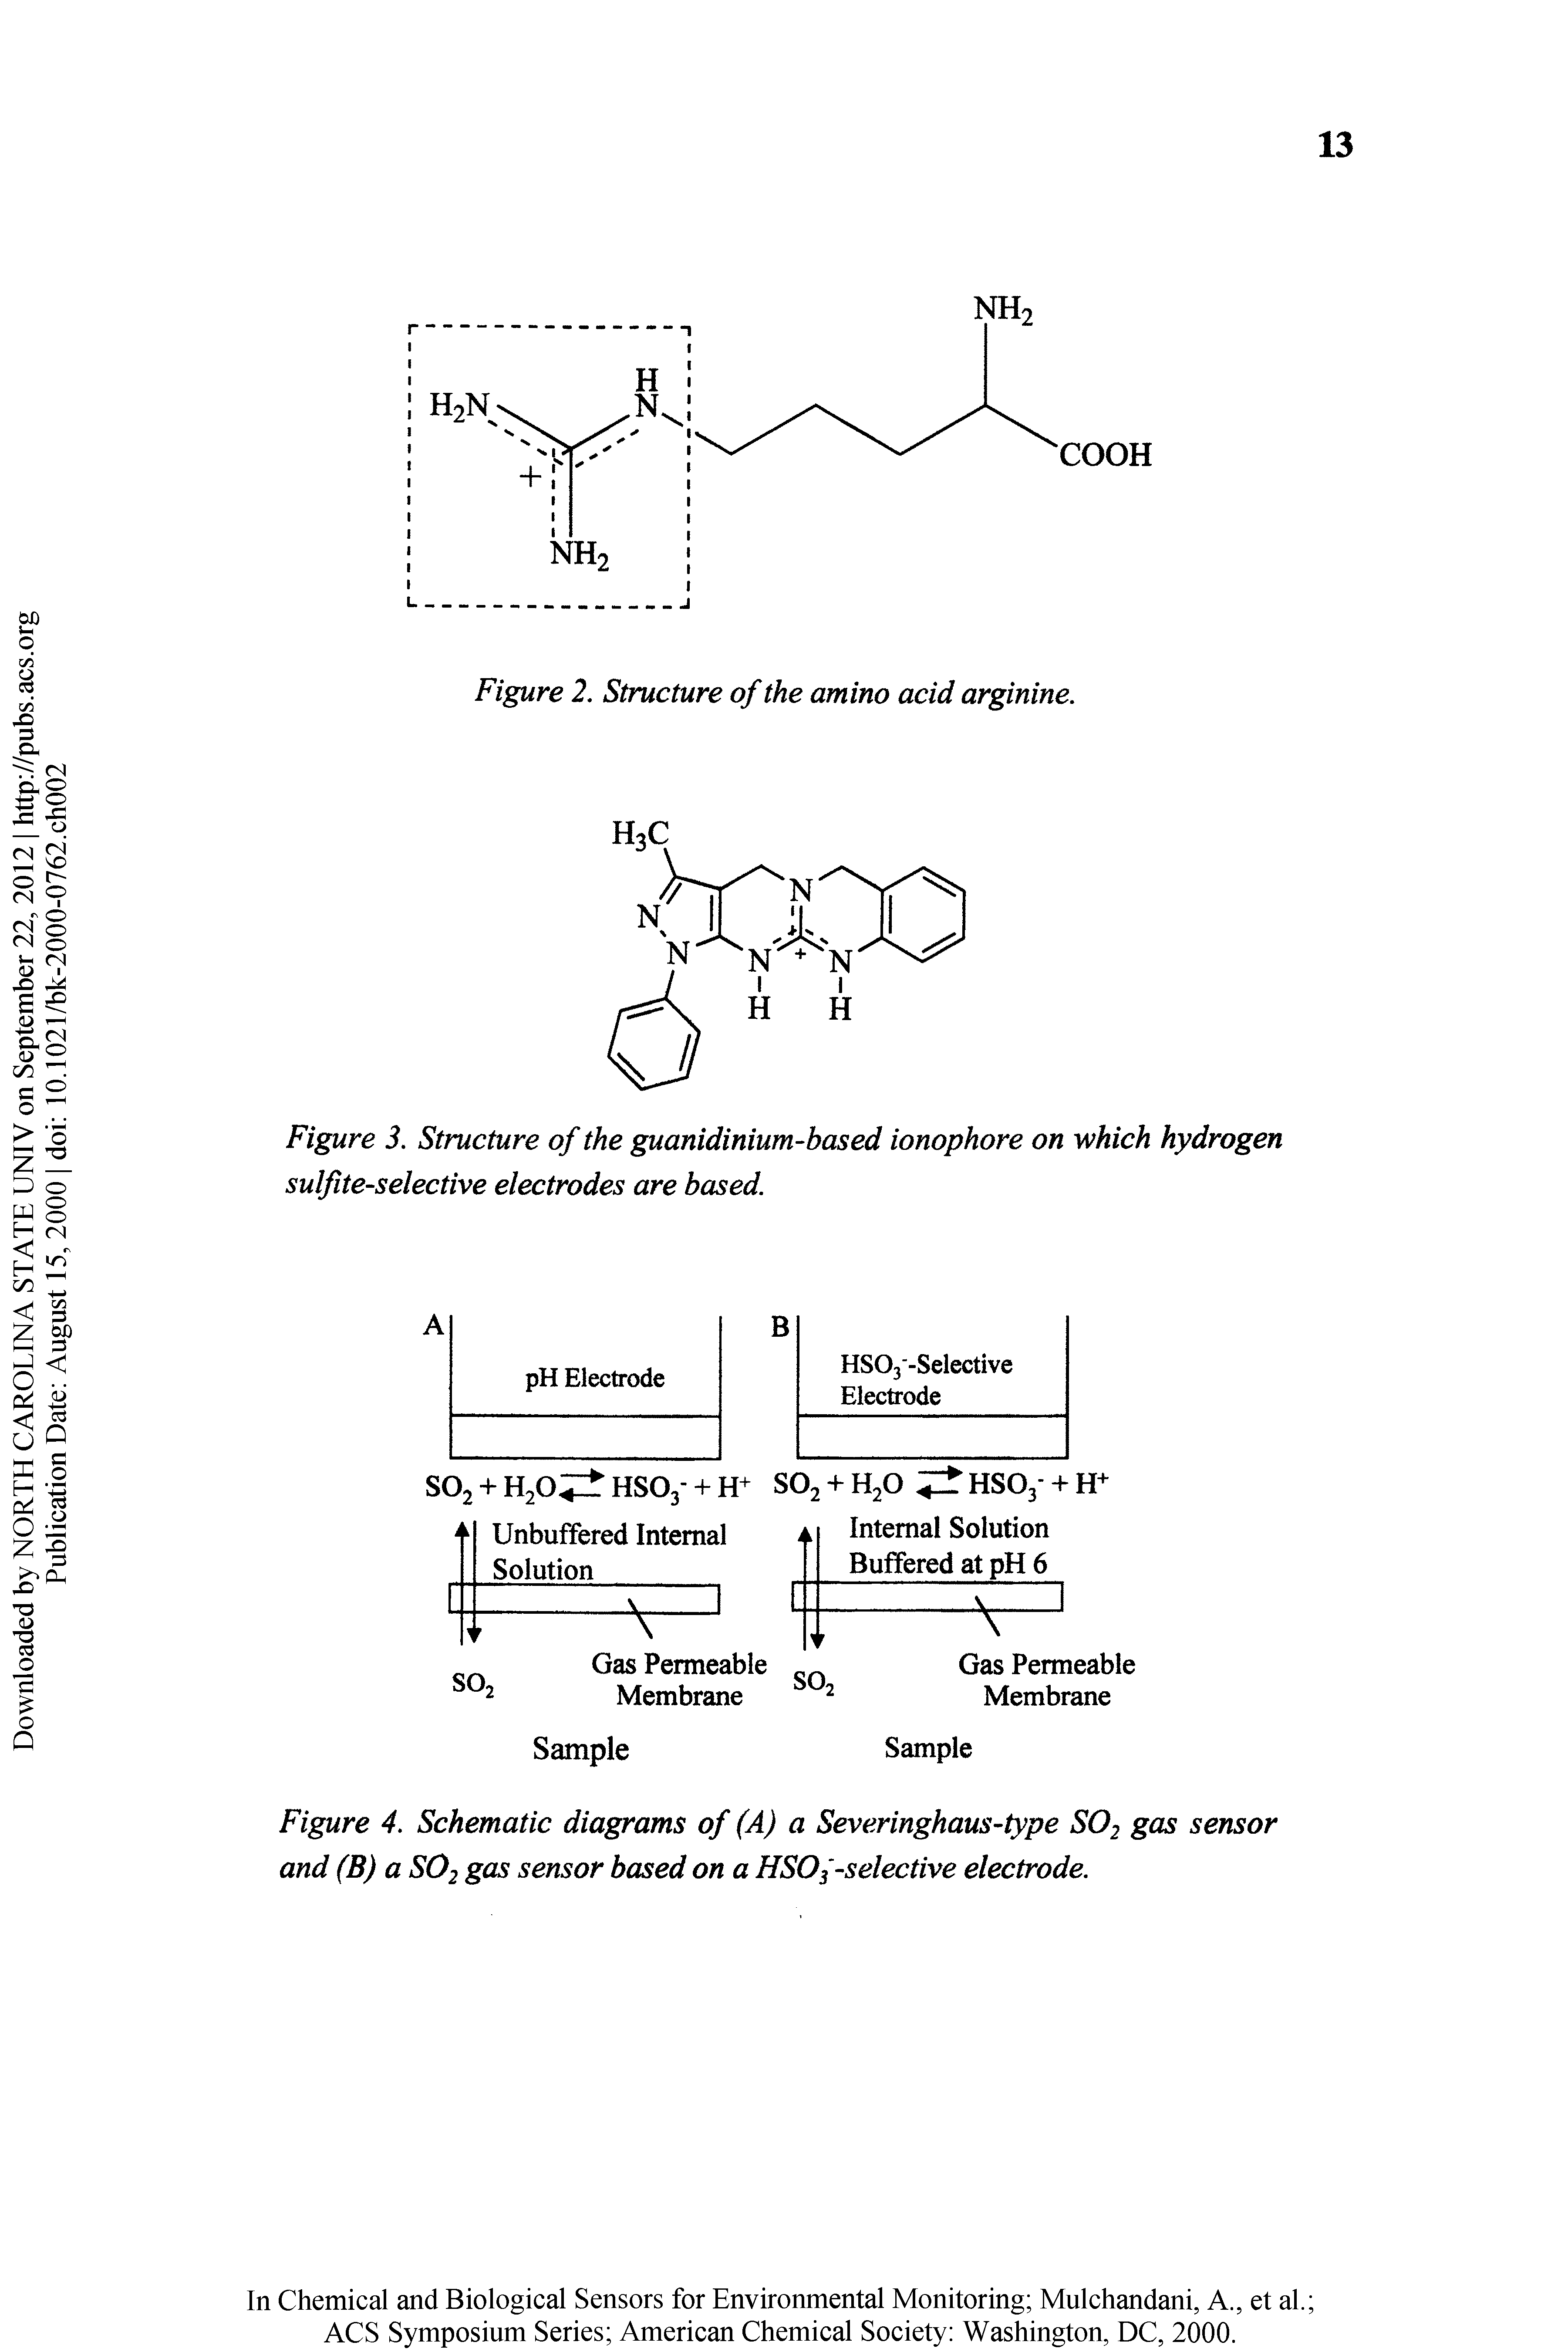 Figure 4. Schematic diagrams of (A) a Severinghaus-type SO2 gas sensor and (B) a SO2 gas sensor based on a HSO -selective electrode.